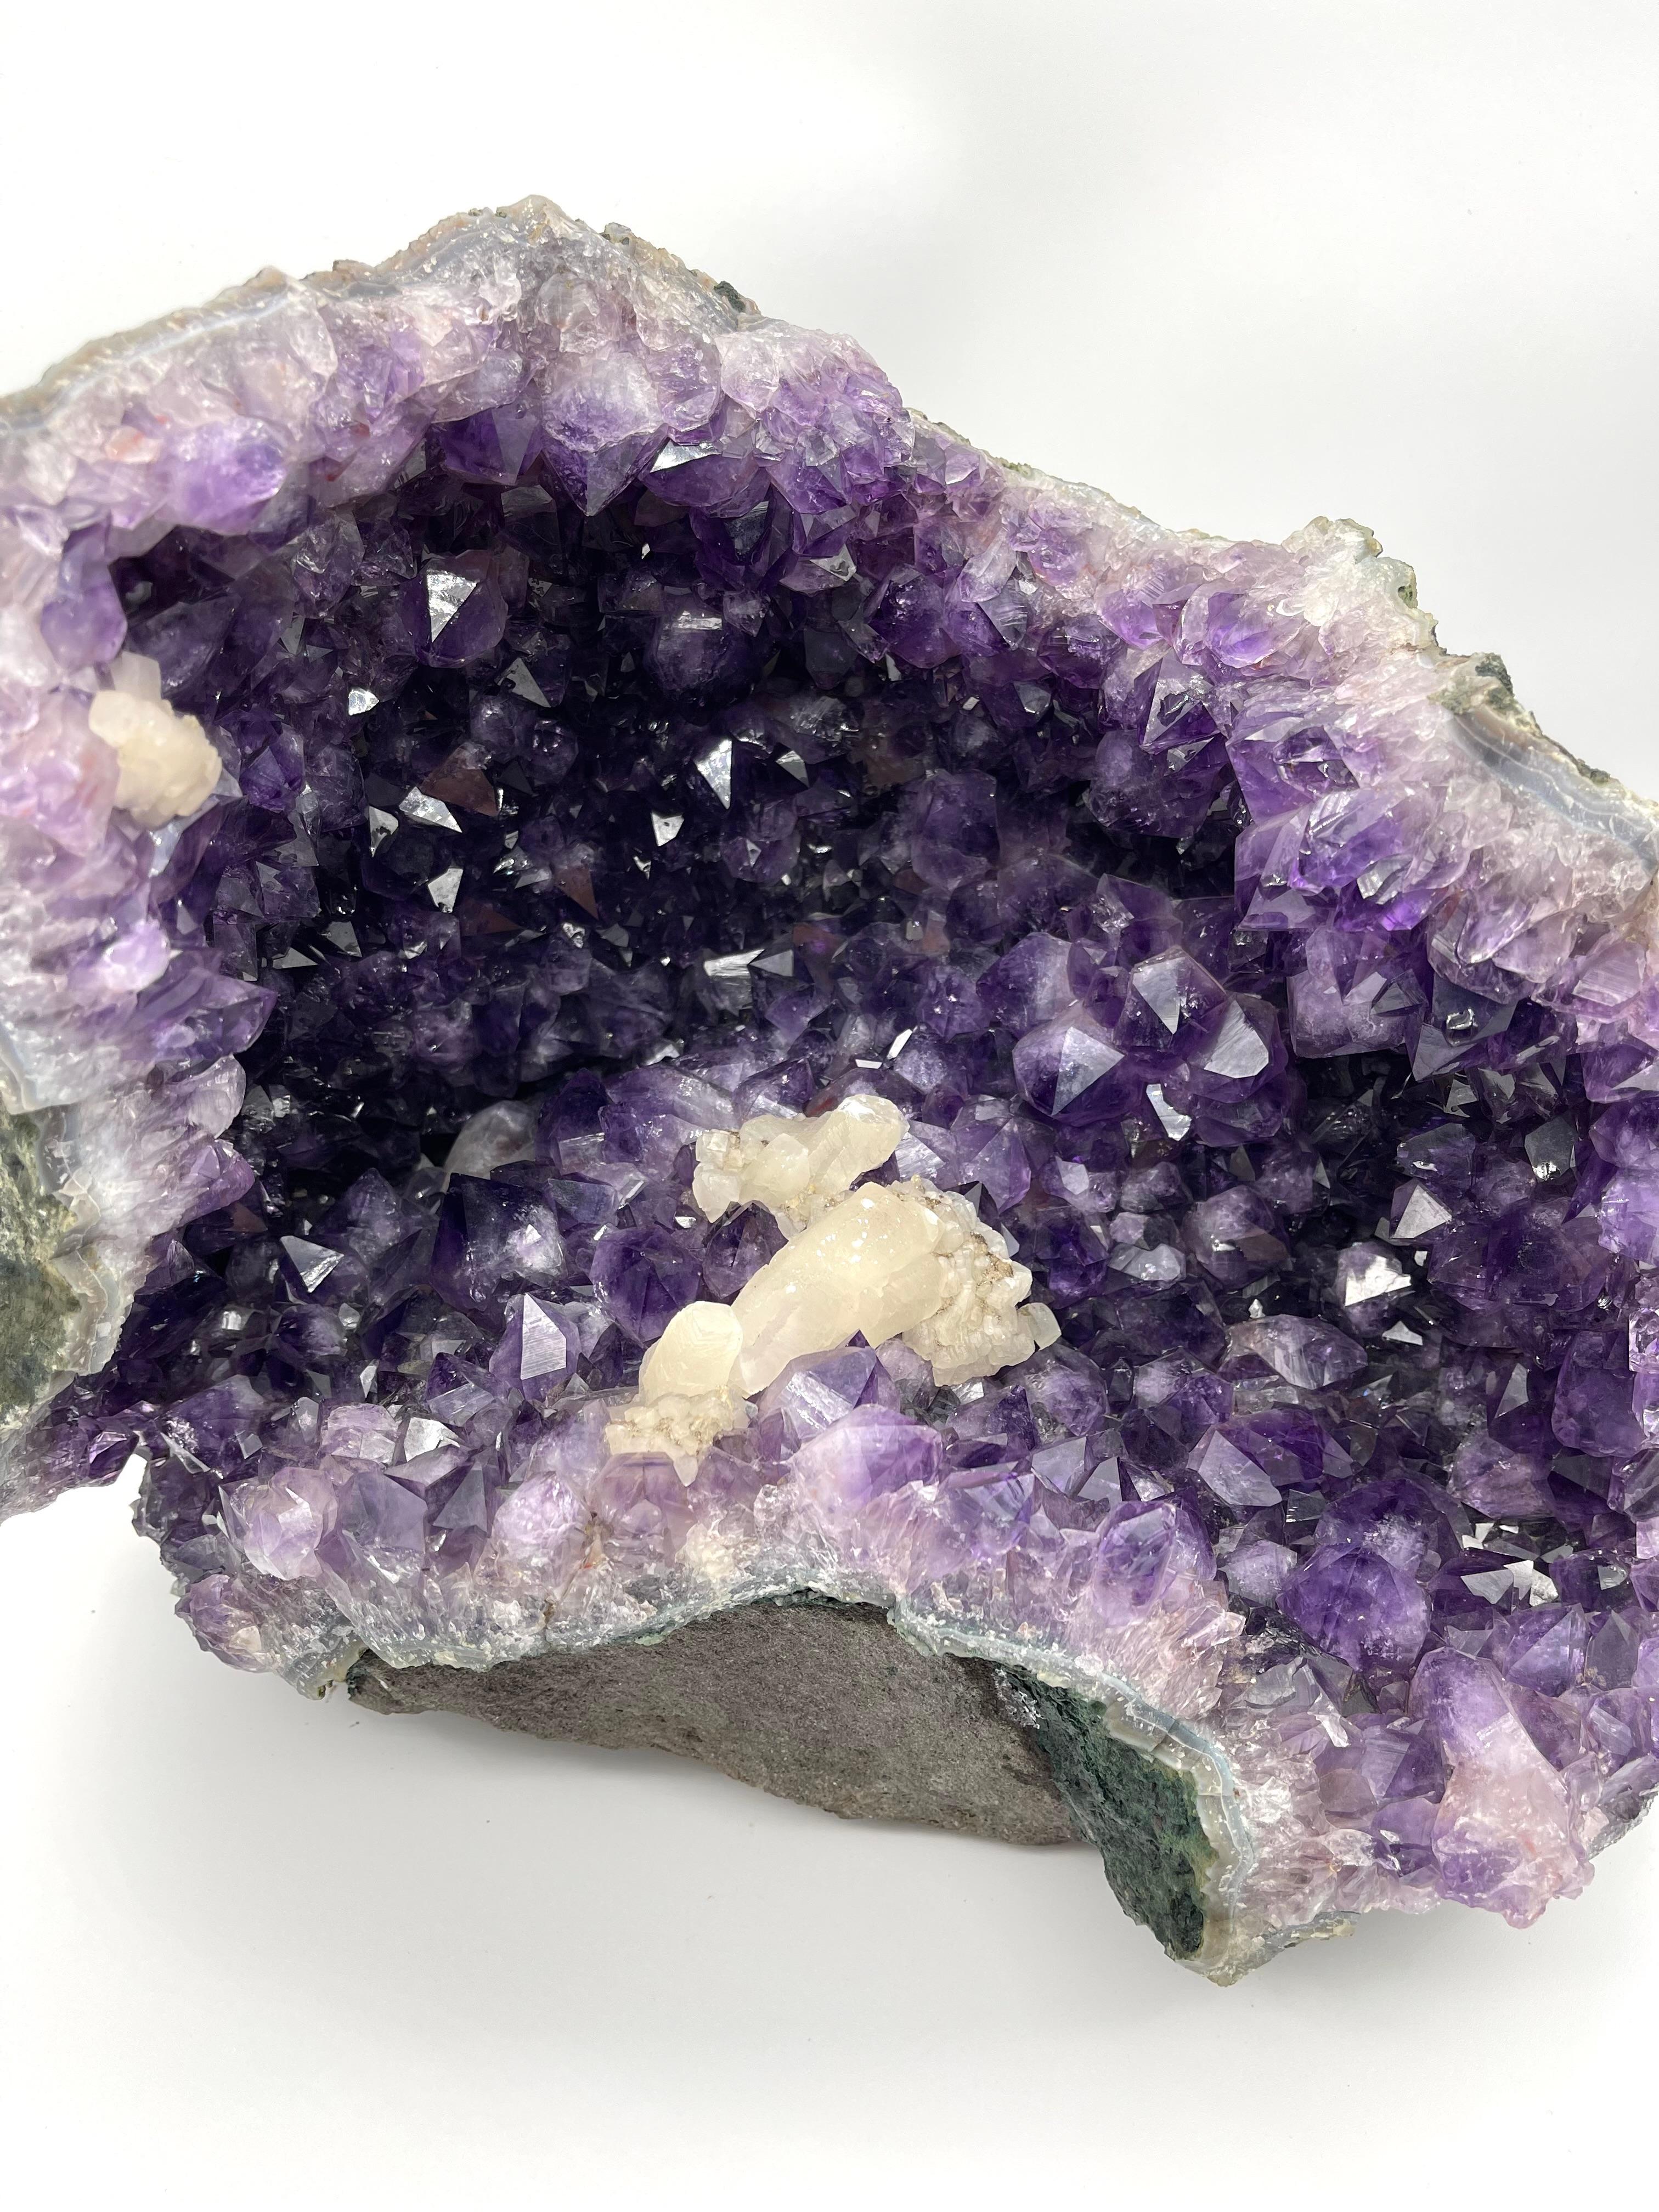 Discover the majestic beauty of this large amethyst geode with quartz inclusion, originating from the Morvan region in France. Weighing an impressive 21 kg, this unique piece is a true wonder of nature that will capture attention and delight mineral